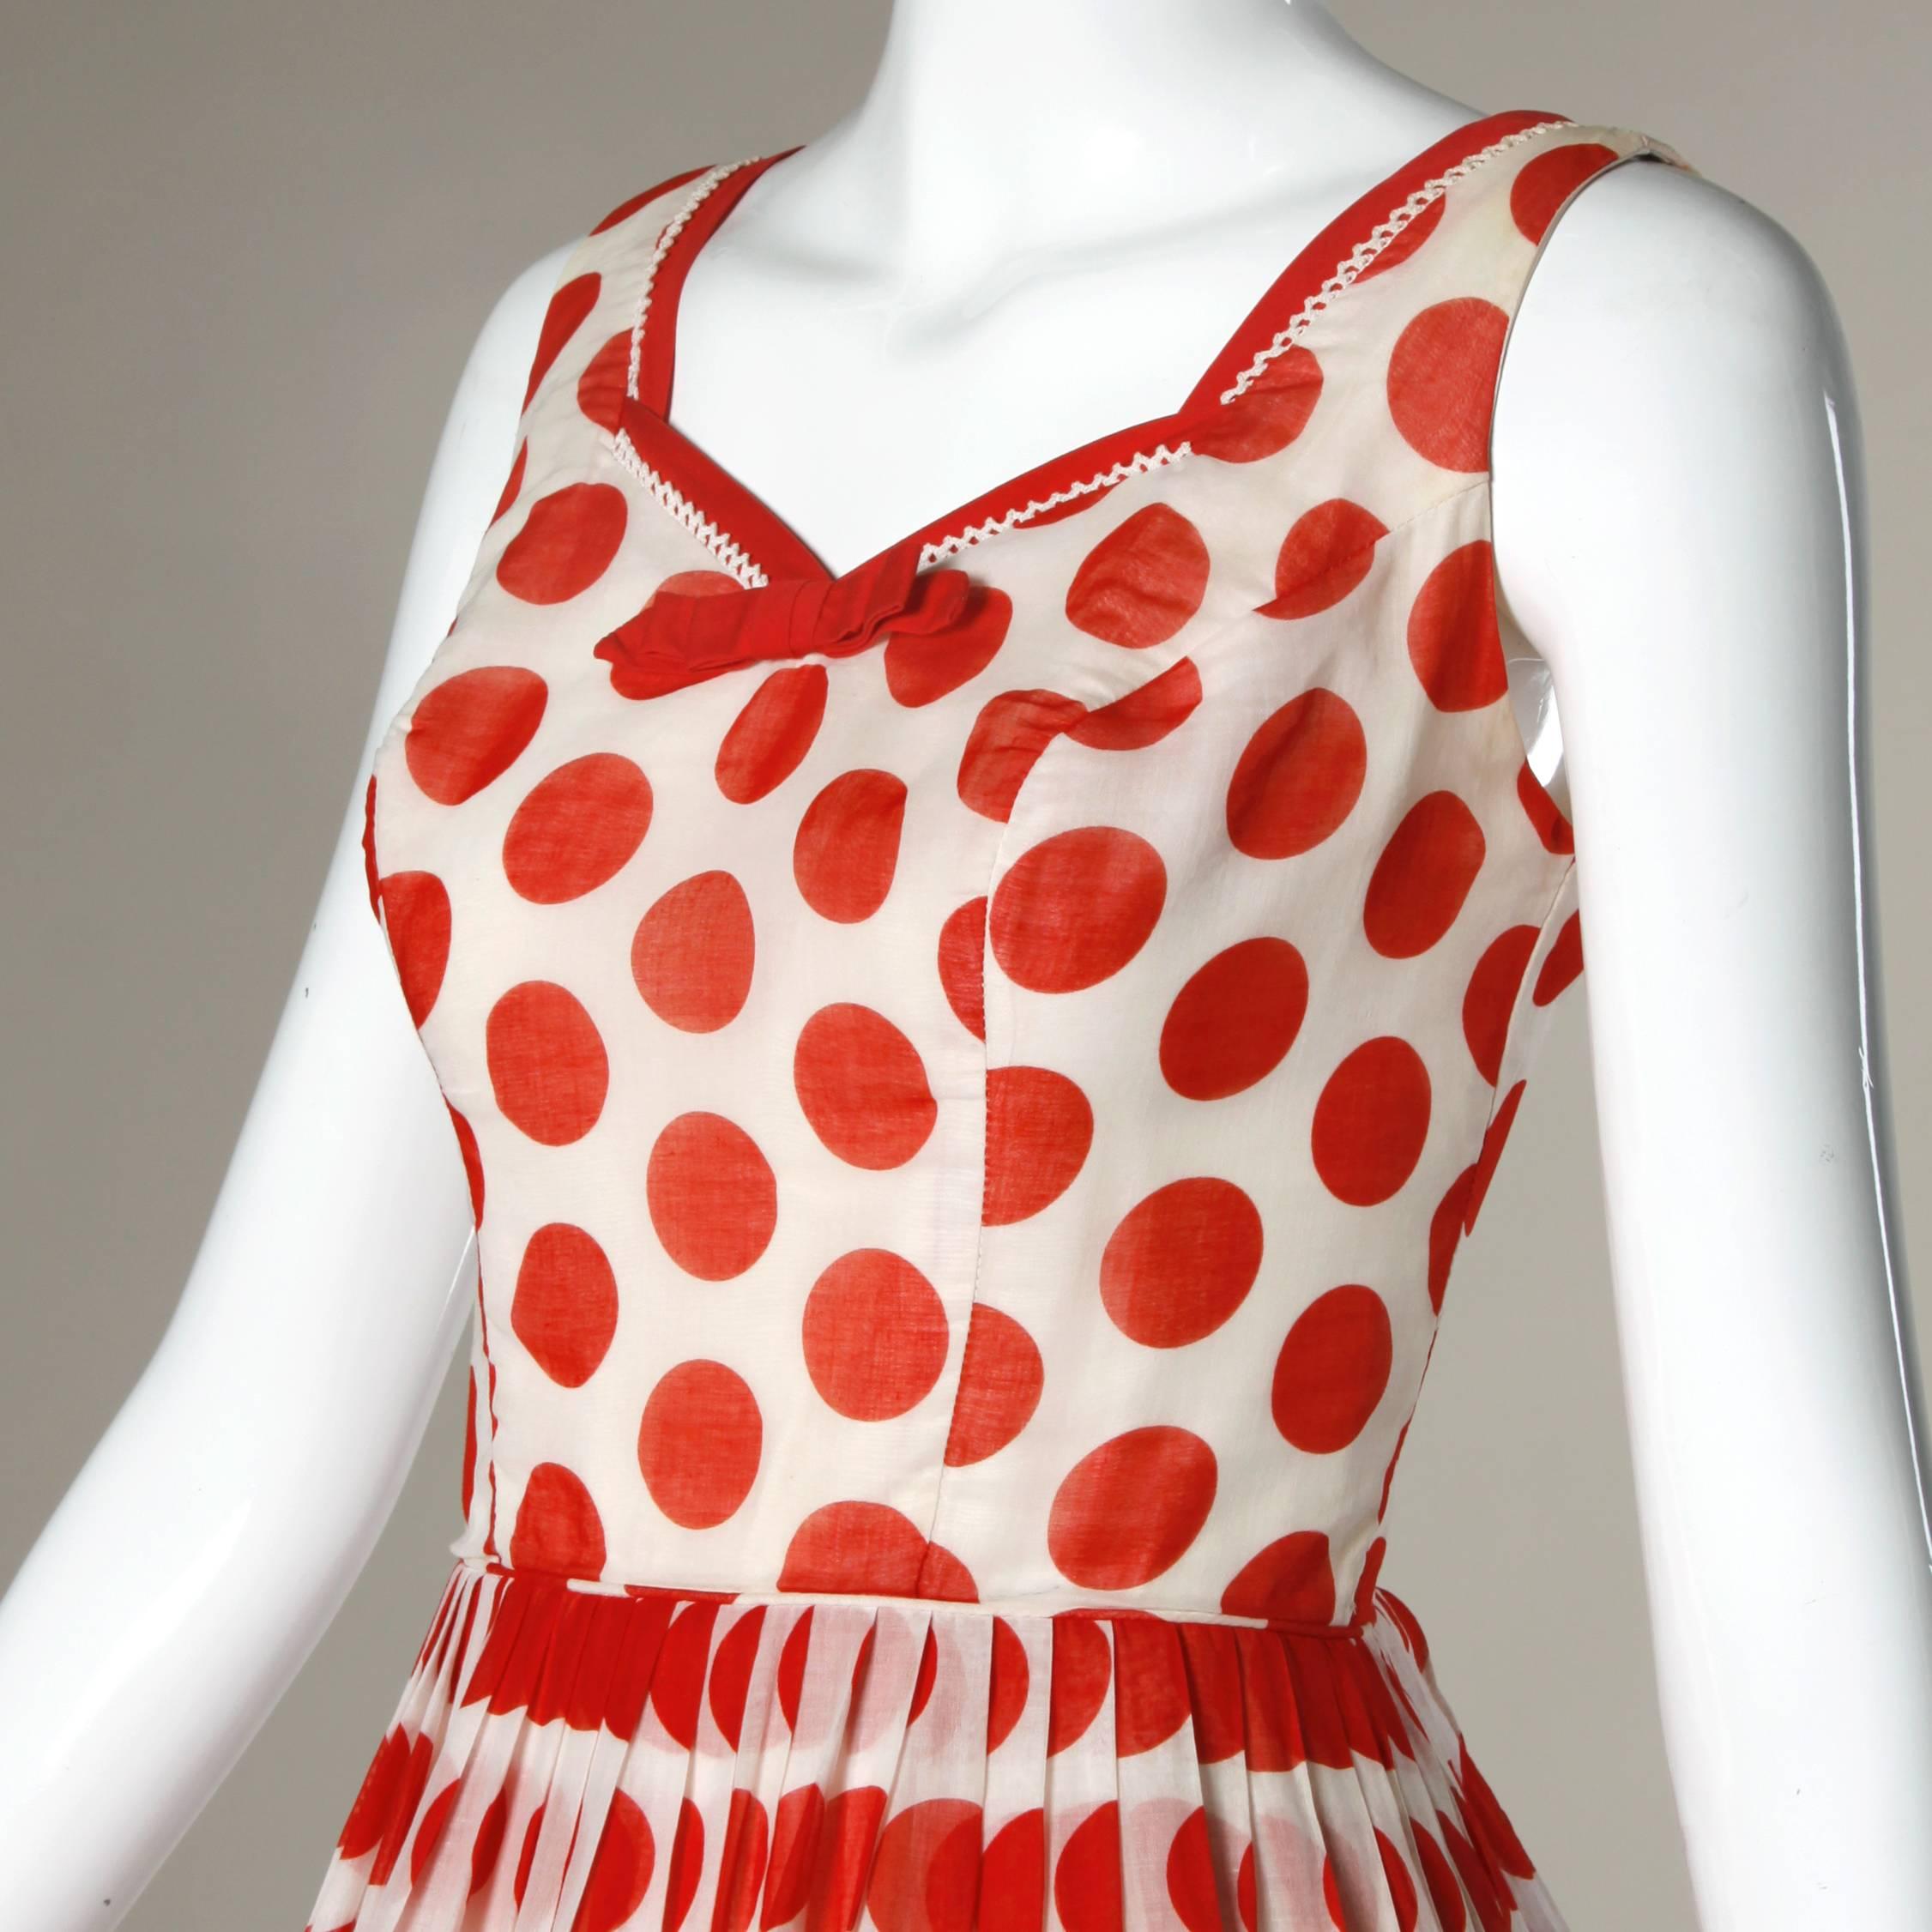 Adorable vintage soft cotton party dress with bright red and white polka dotted fabric and bow trim. Full skirt.

Details:

Fully Lined
Back Metal Zip and Hook Closure
Marked Size: Not Marked
Estimated Size: S-M
Color: Red/ White
Fabric: